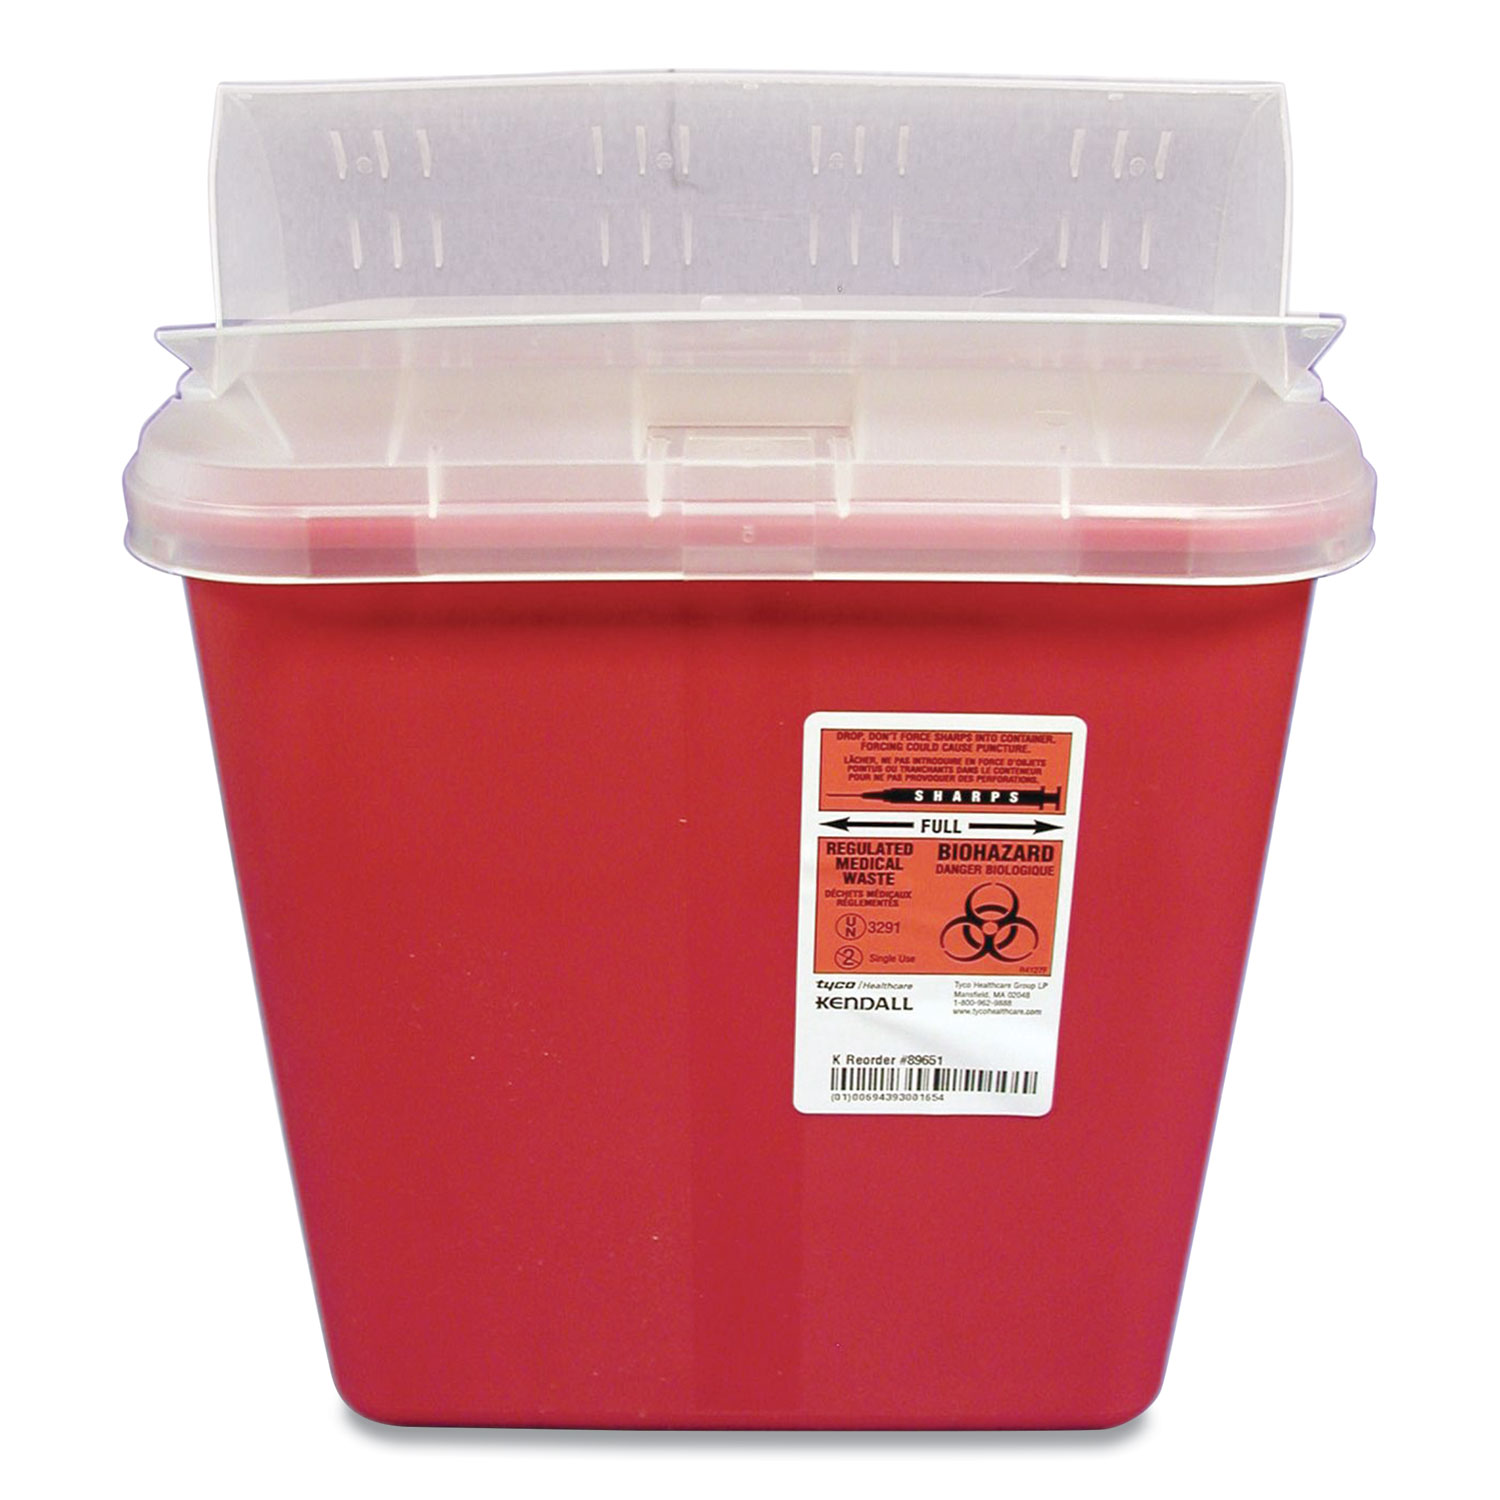  Covidien S2GH100651 Sharps Containers, 2 gal, Red (UMI567796) 